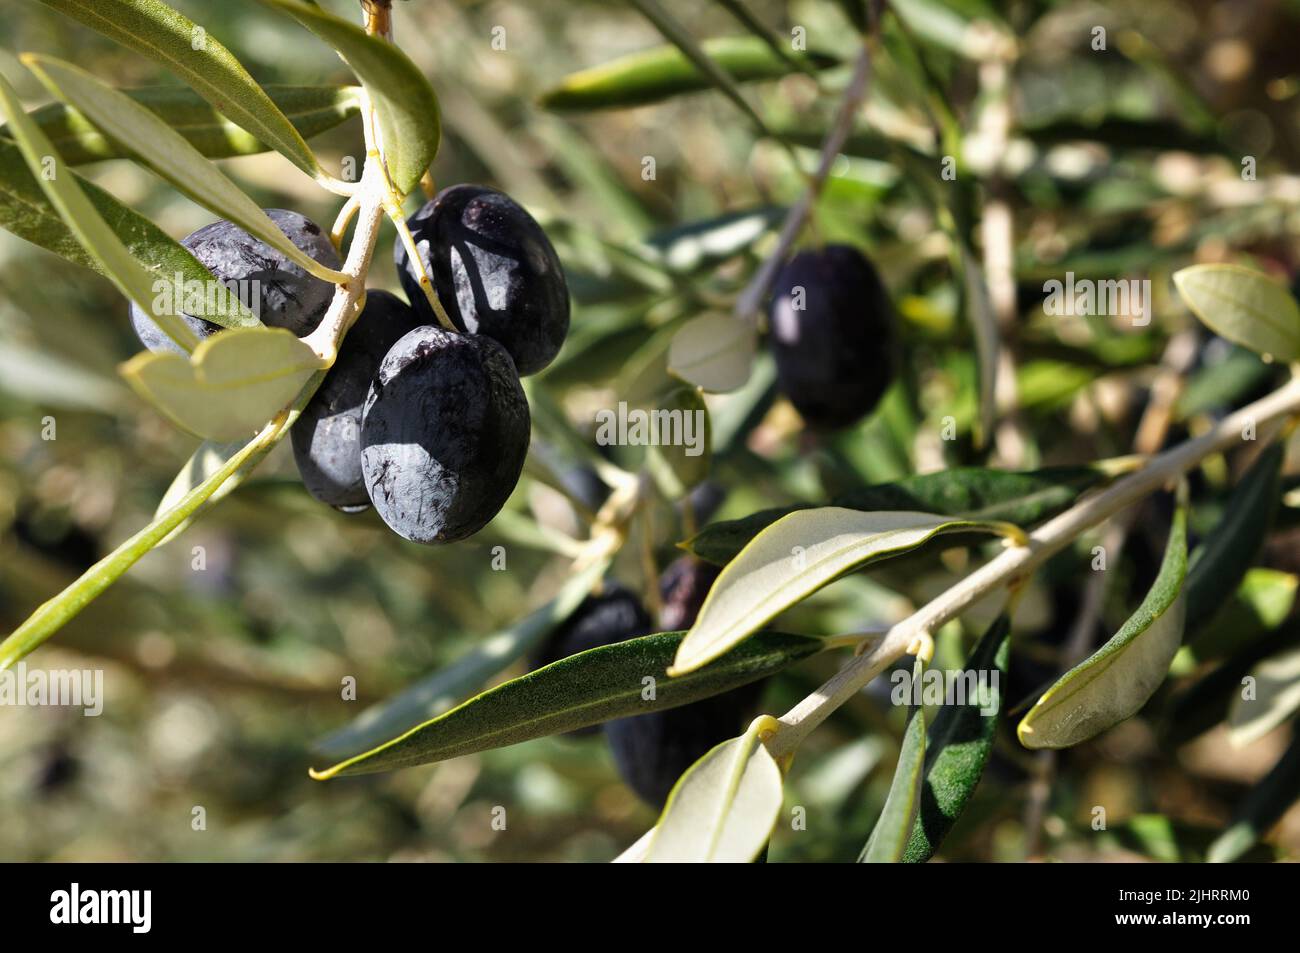 Black olive fruit on olive branch. The olive, botanical name Olea europaea, meaning 'European olive' in Latin, is a species of small tree or shrub in Stock Photo